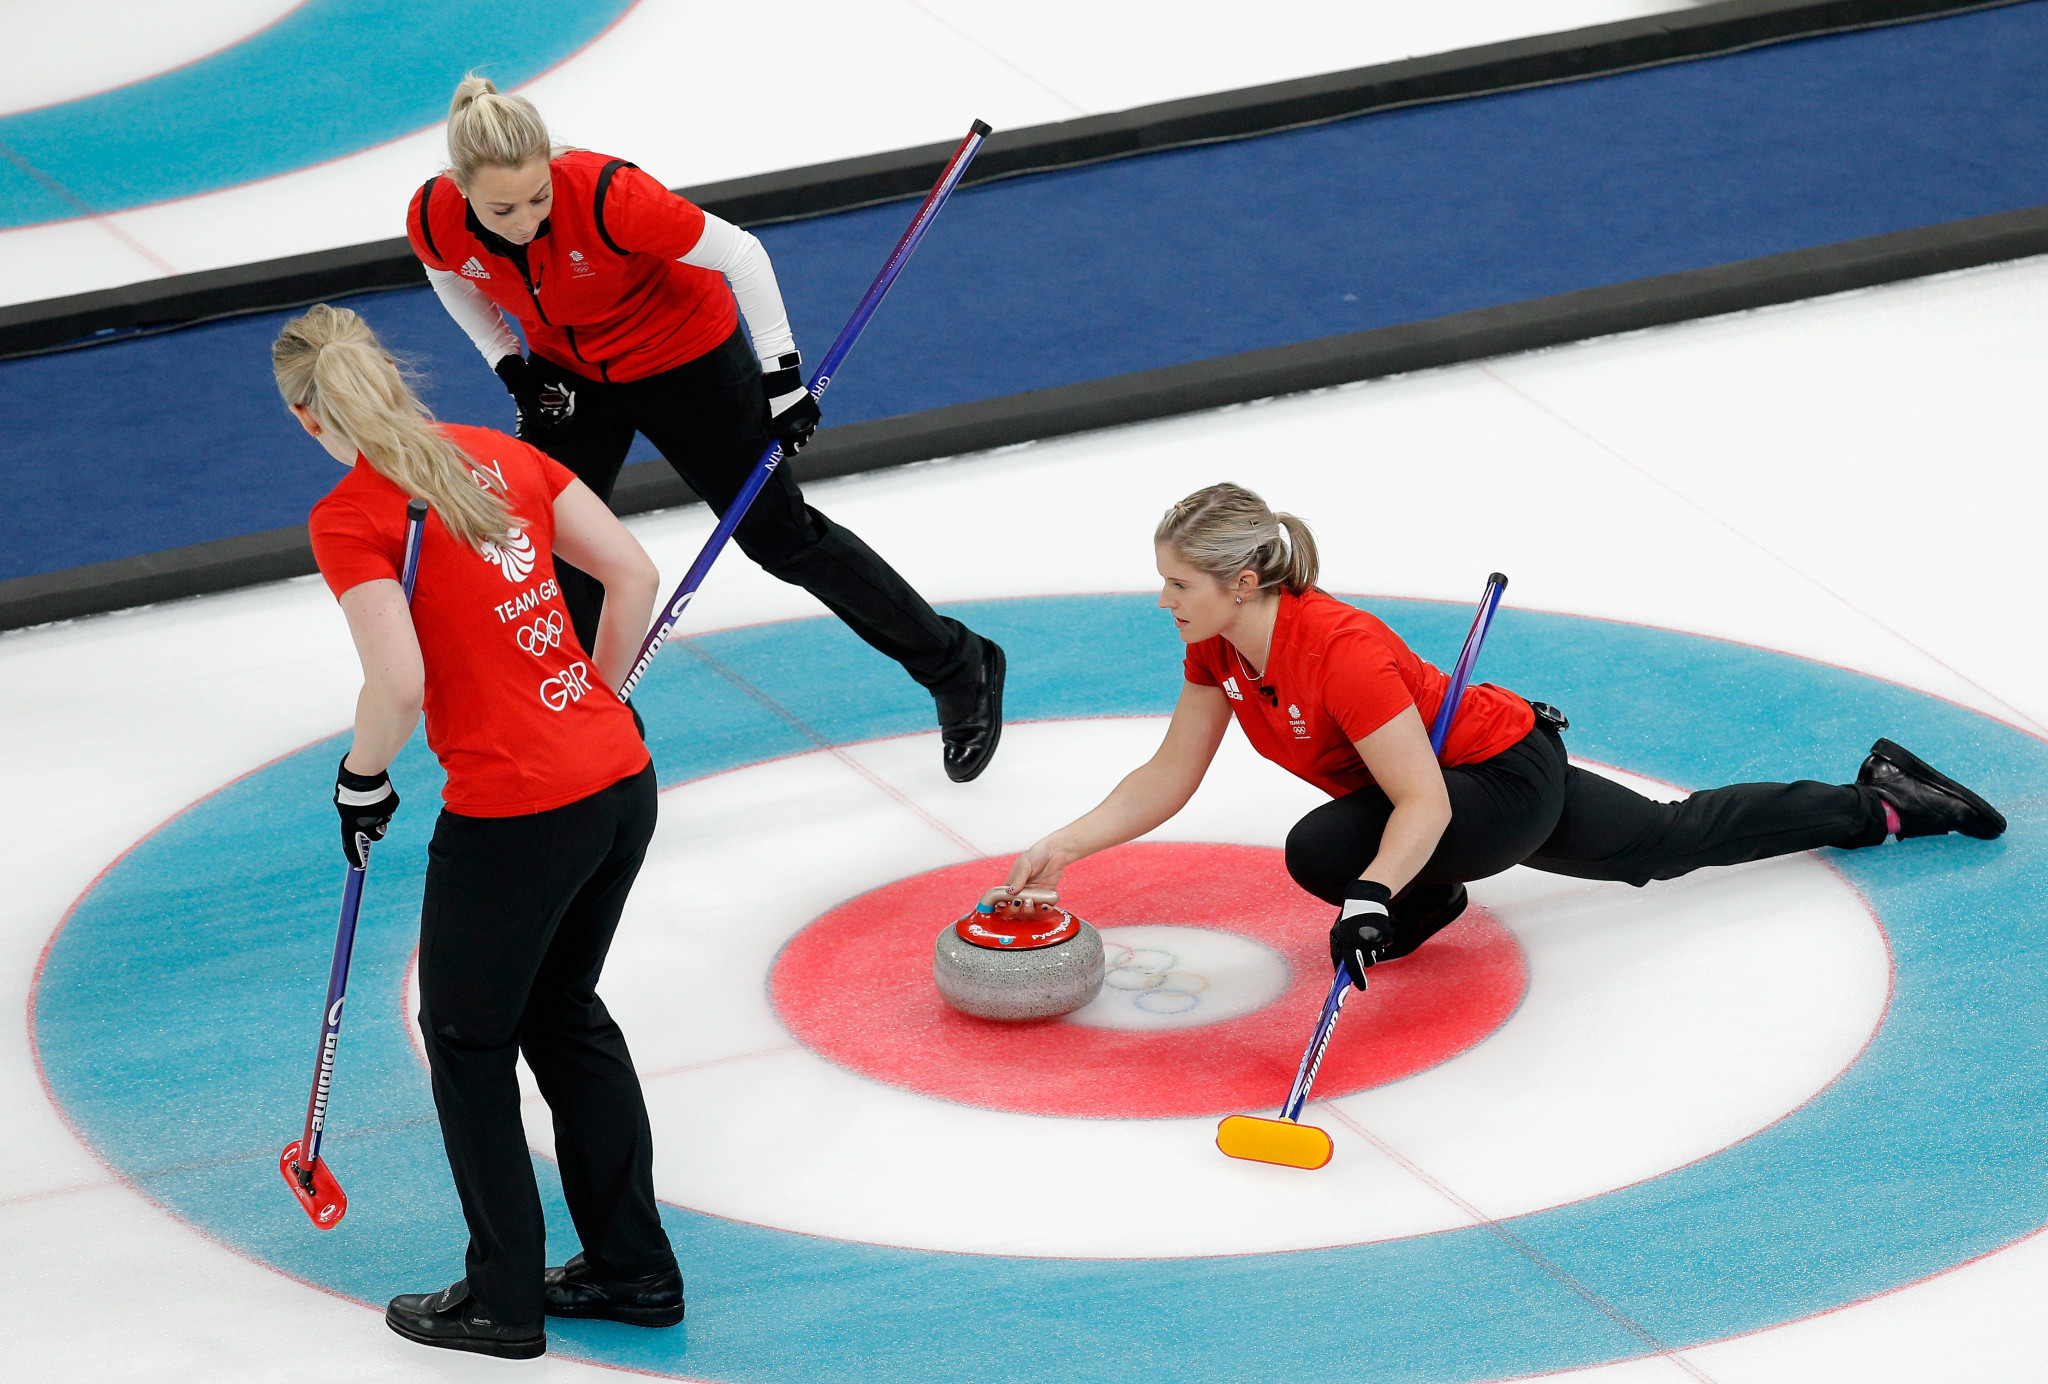 Curling is hoping to build on the Pyeongchang 2018 Winter Olympics ©Getty Images